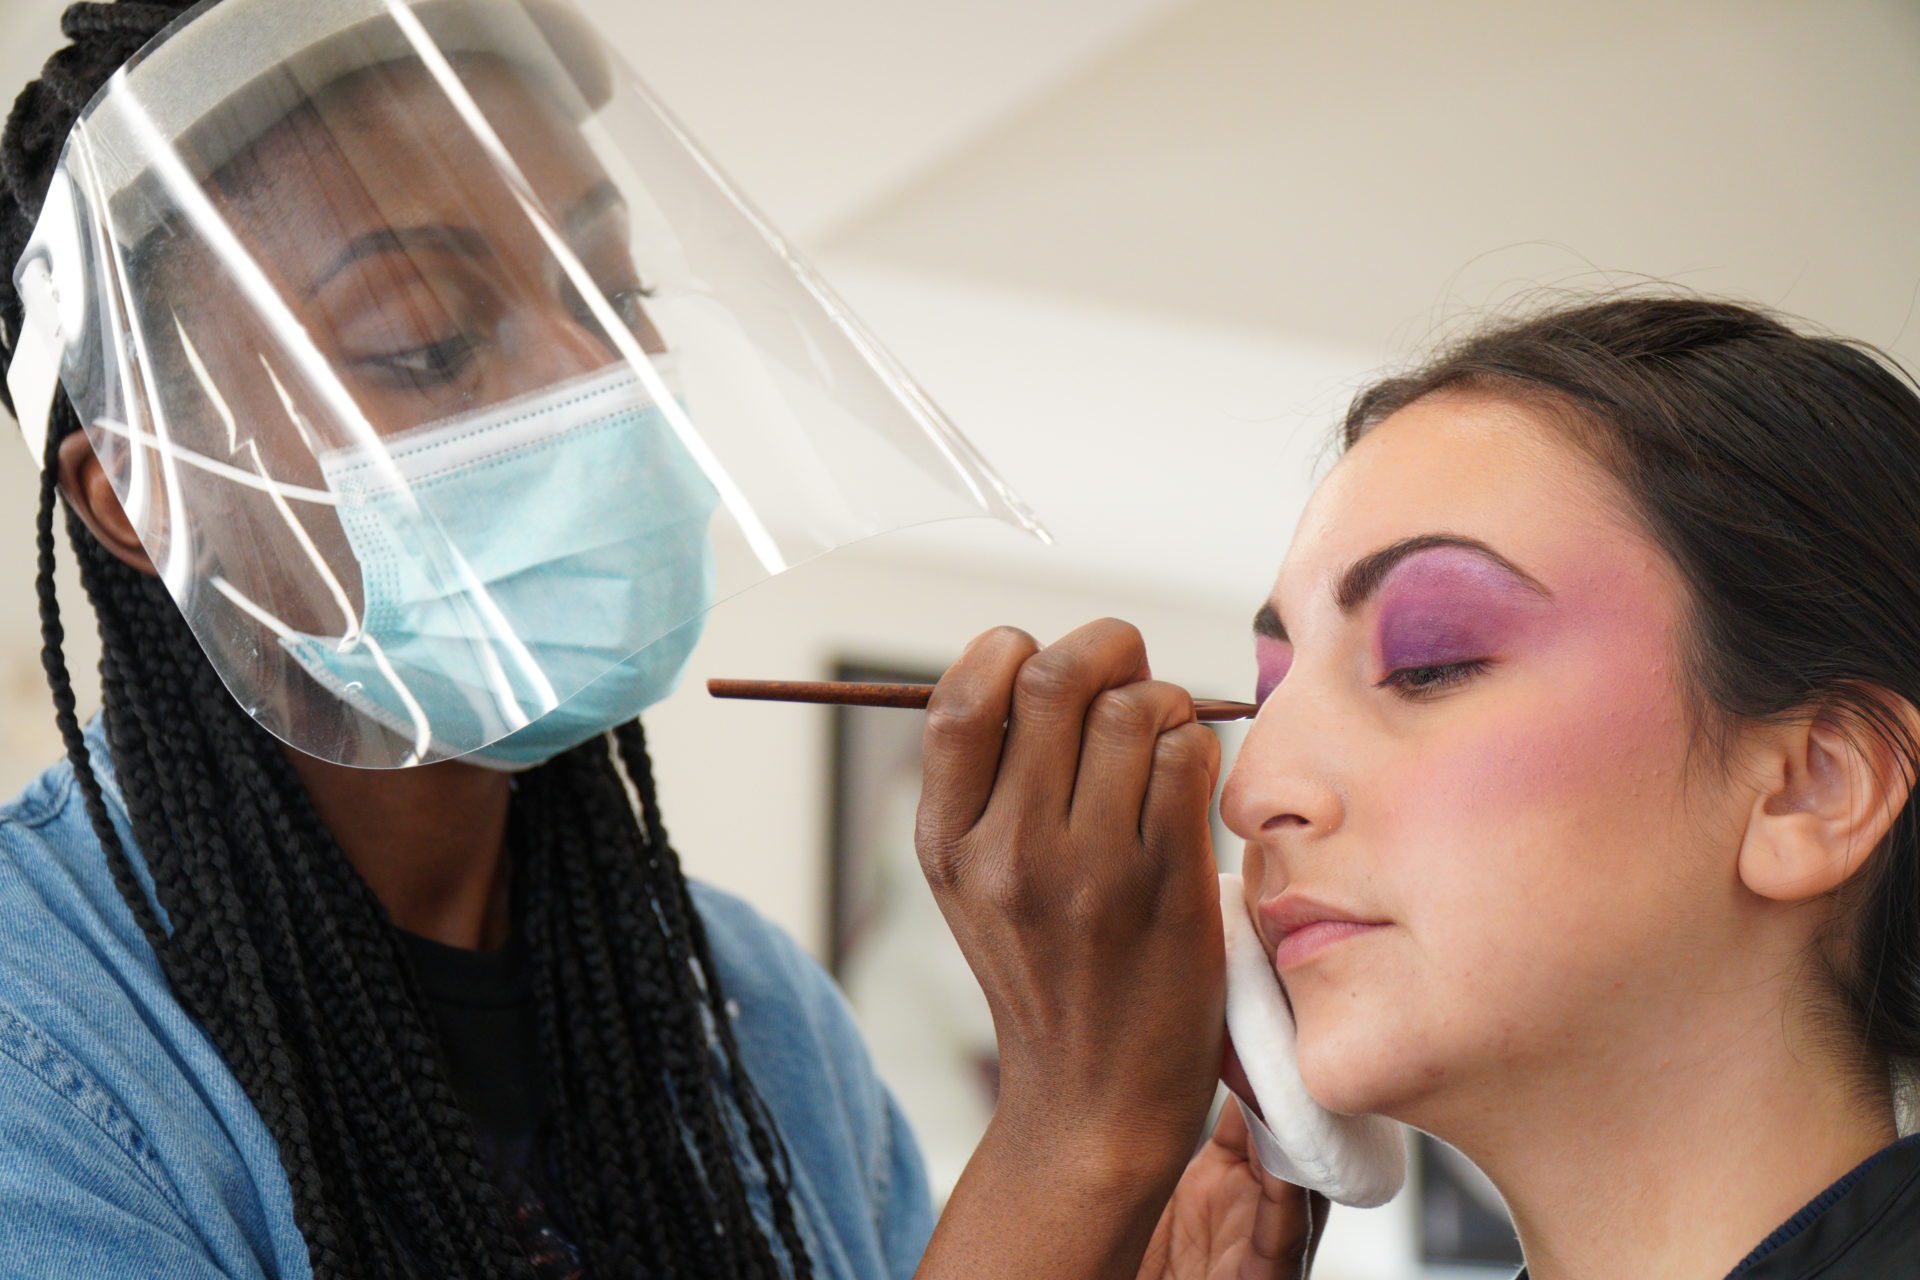 list-of-makeup-artist-services-all-you-need-to-know-cmu-college-cmu